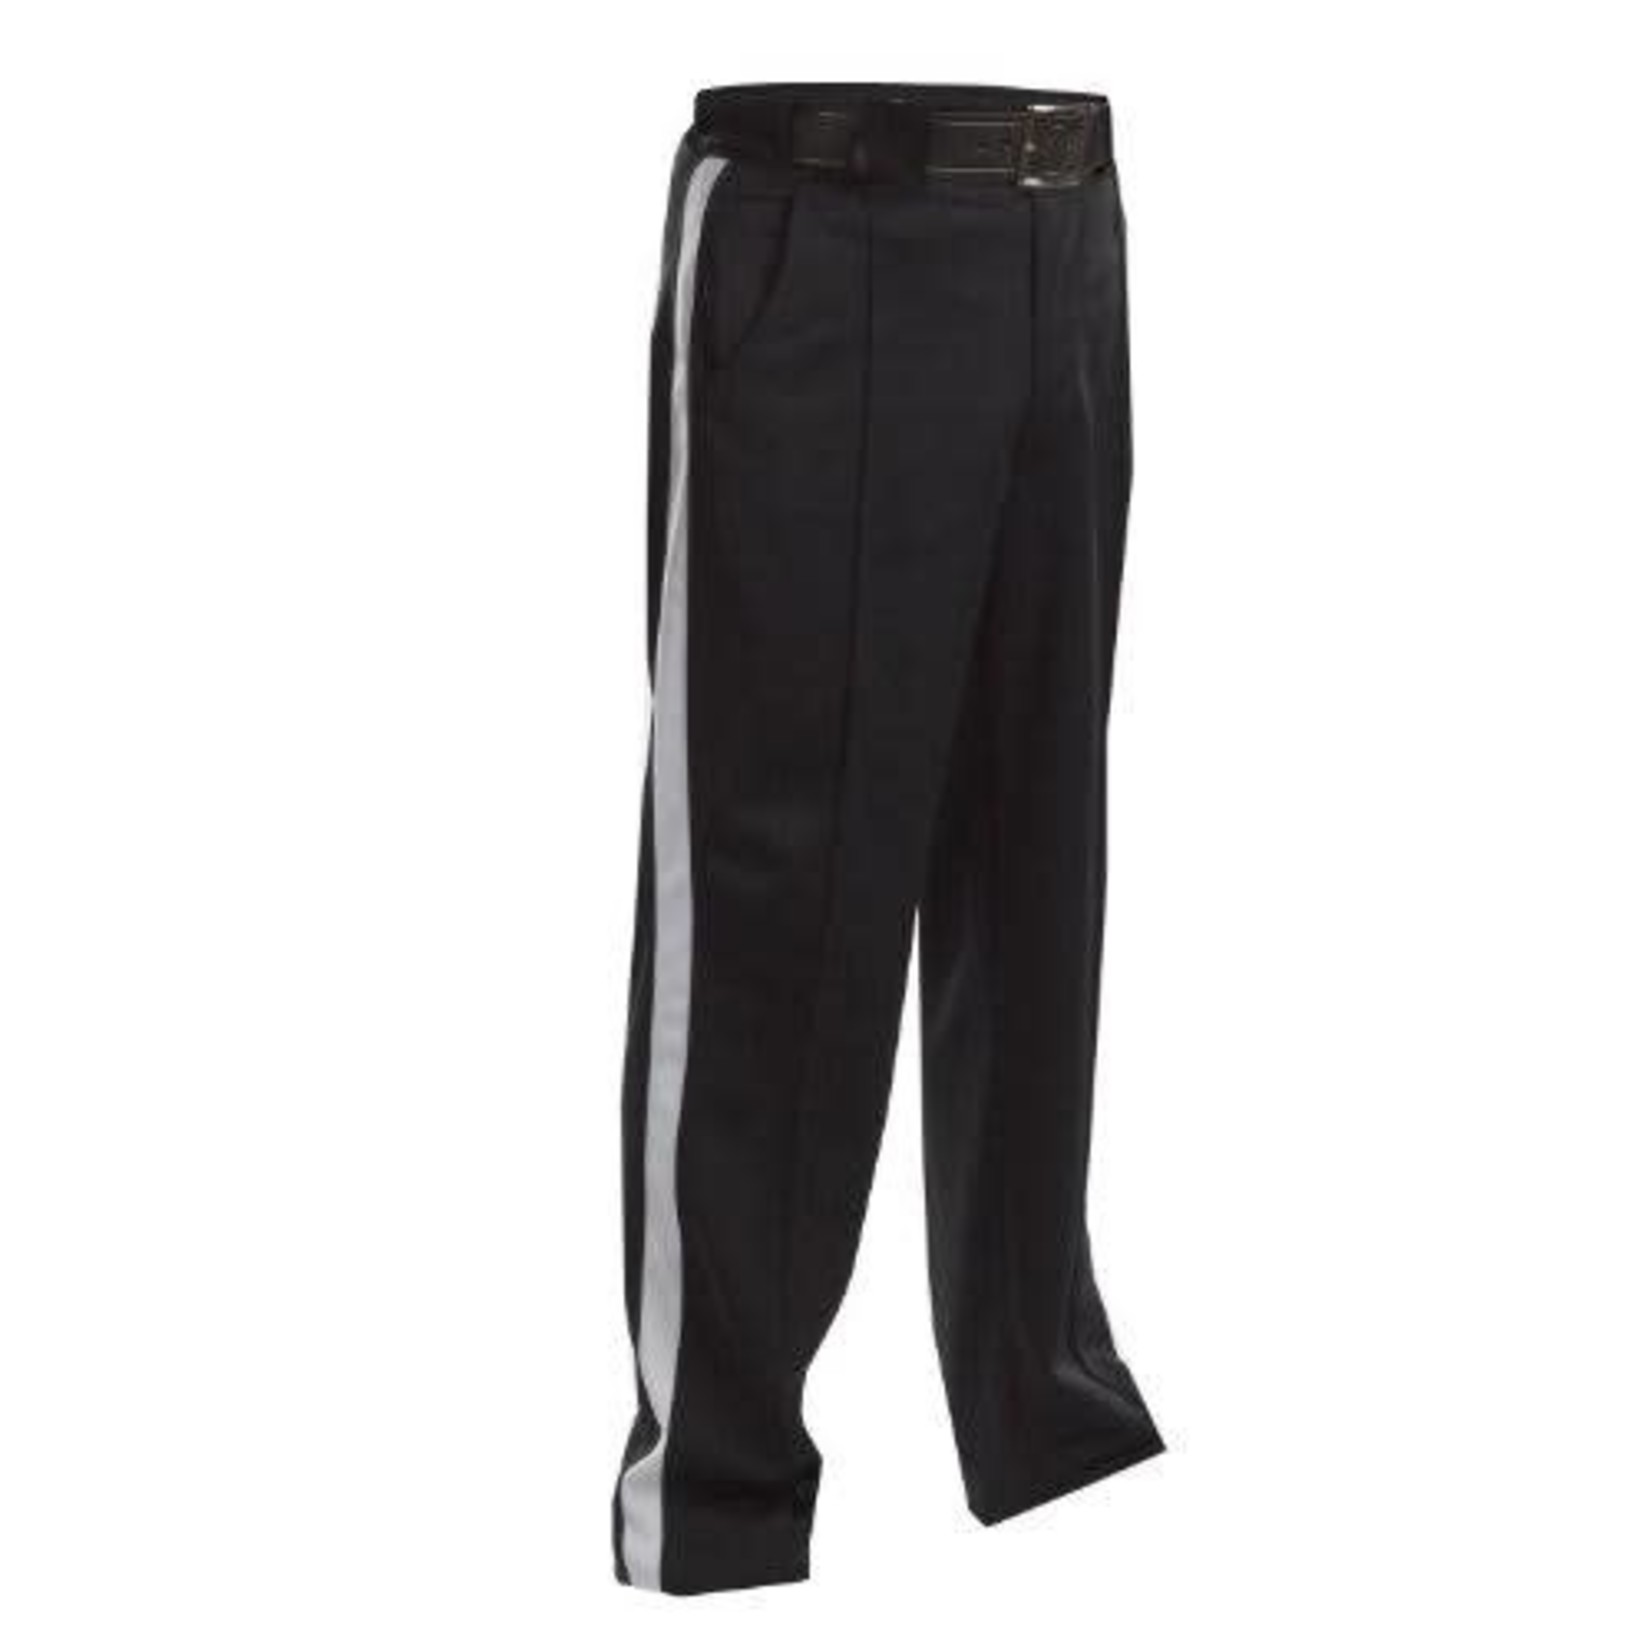 Smitty Smitty Football Officials Warm Weather Pants Black with White Stripe